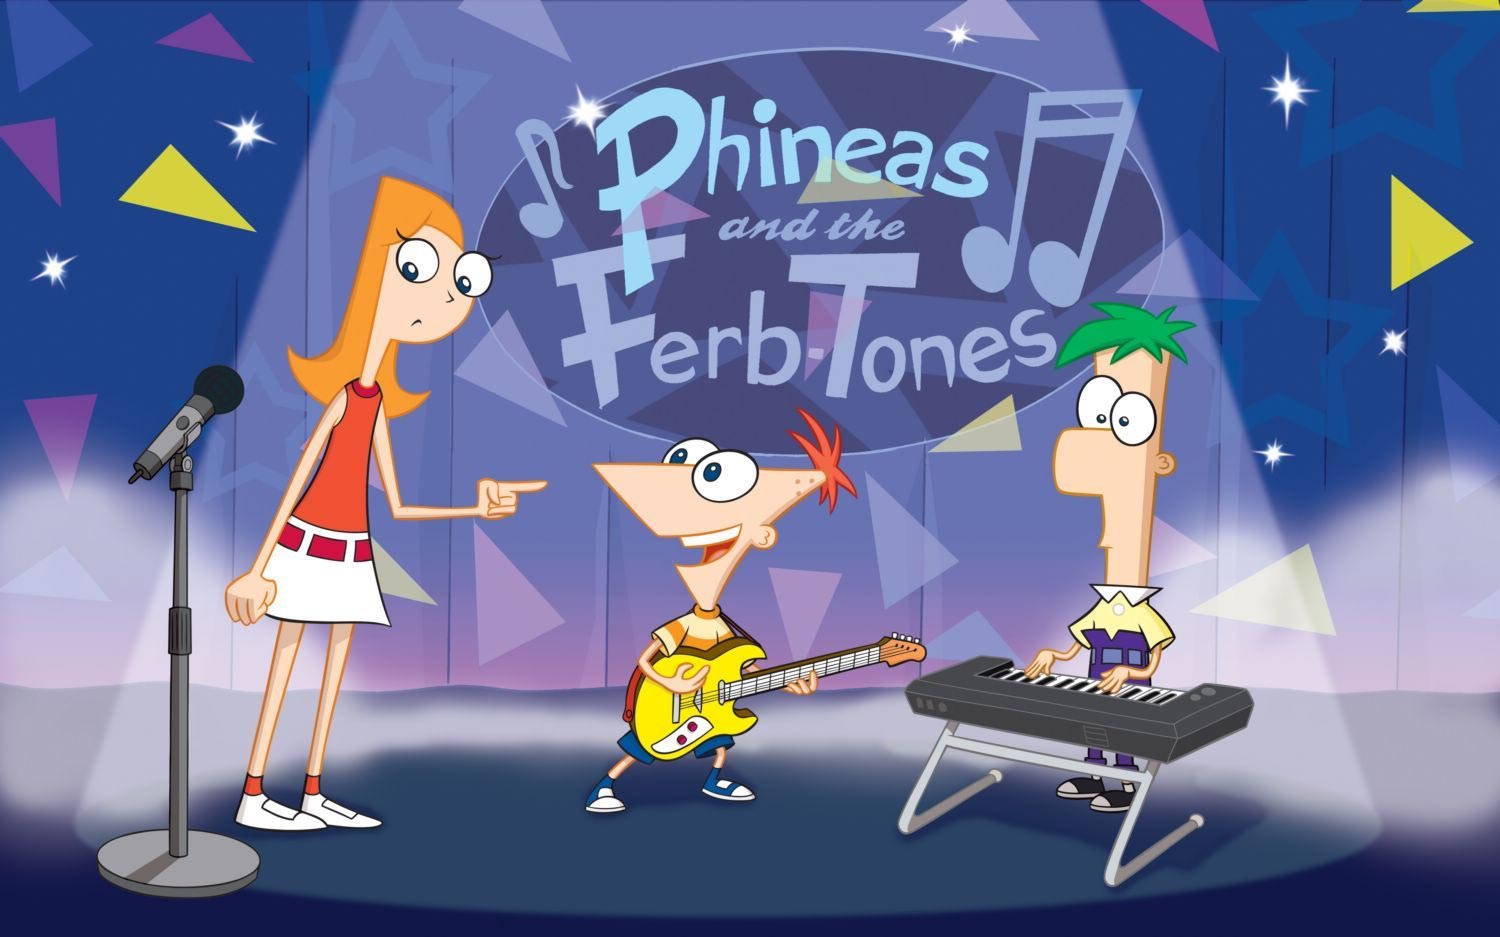 Phineas and Ferb Wallpaper for Desktop. Phineas Flynn Wallpaper, Phineas and Ferb Wallpaper and Phineas and Ferb Background